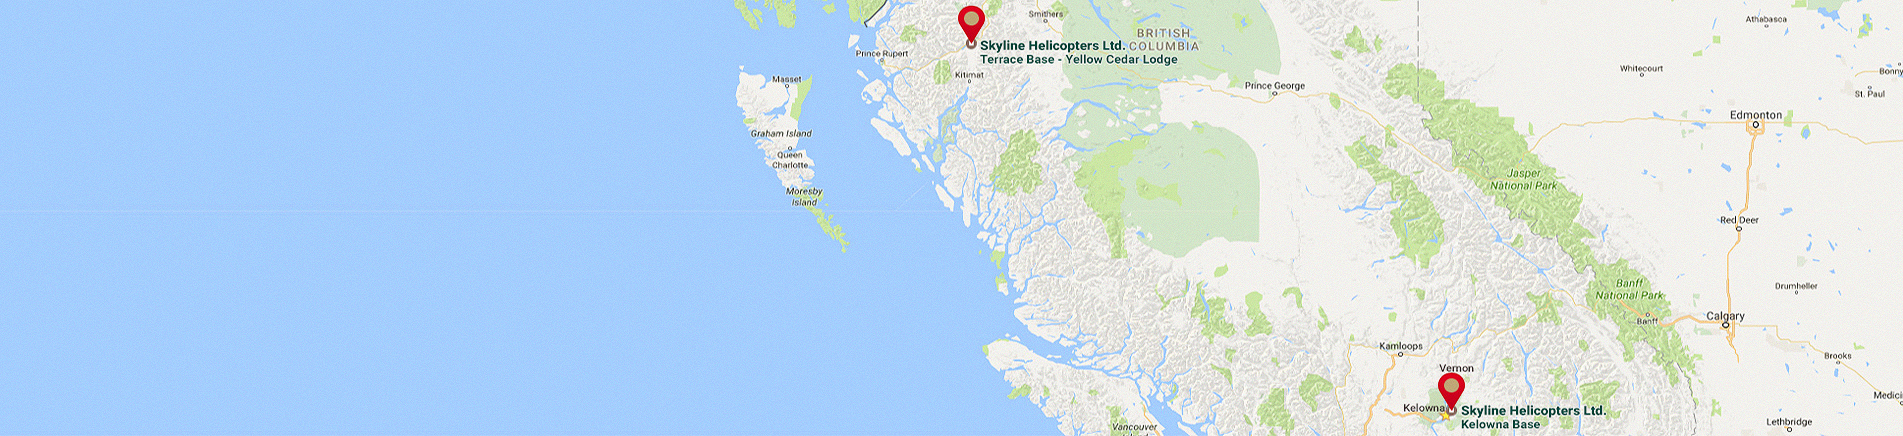 Skyline Helicopters heli skiing holidays hydro forestry tours Kelowna Terrace BC Map